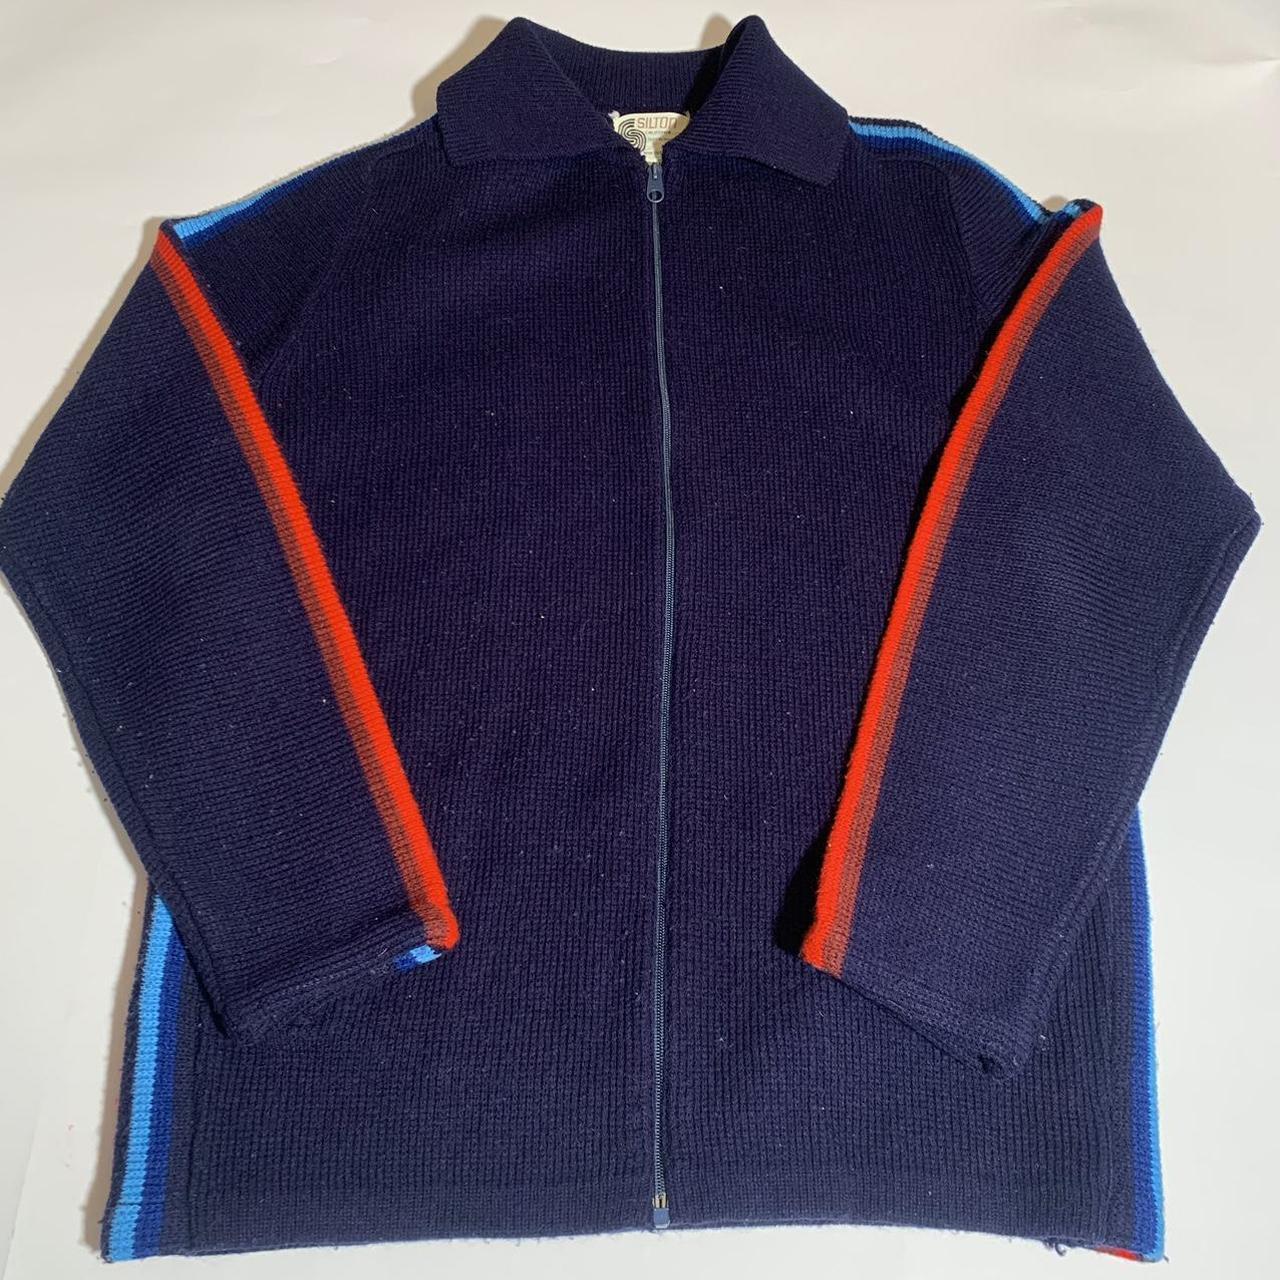 70s Navy Striped Zip Up Sweater Size Large This... - Depop